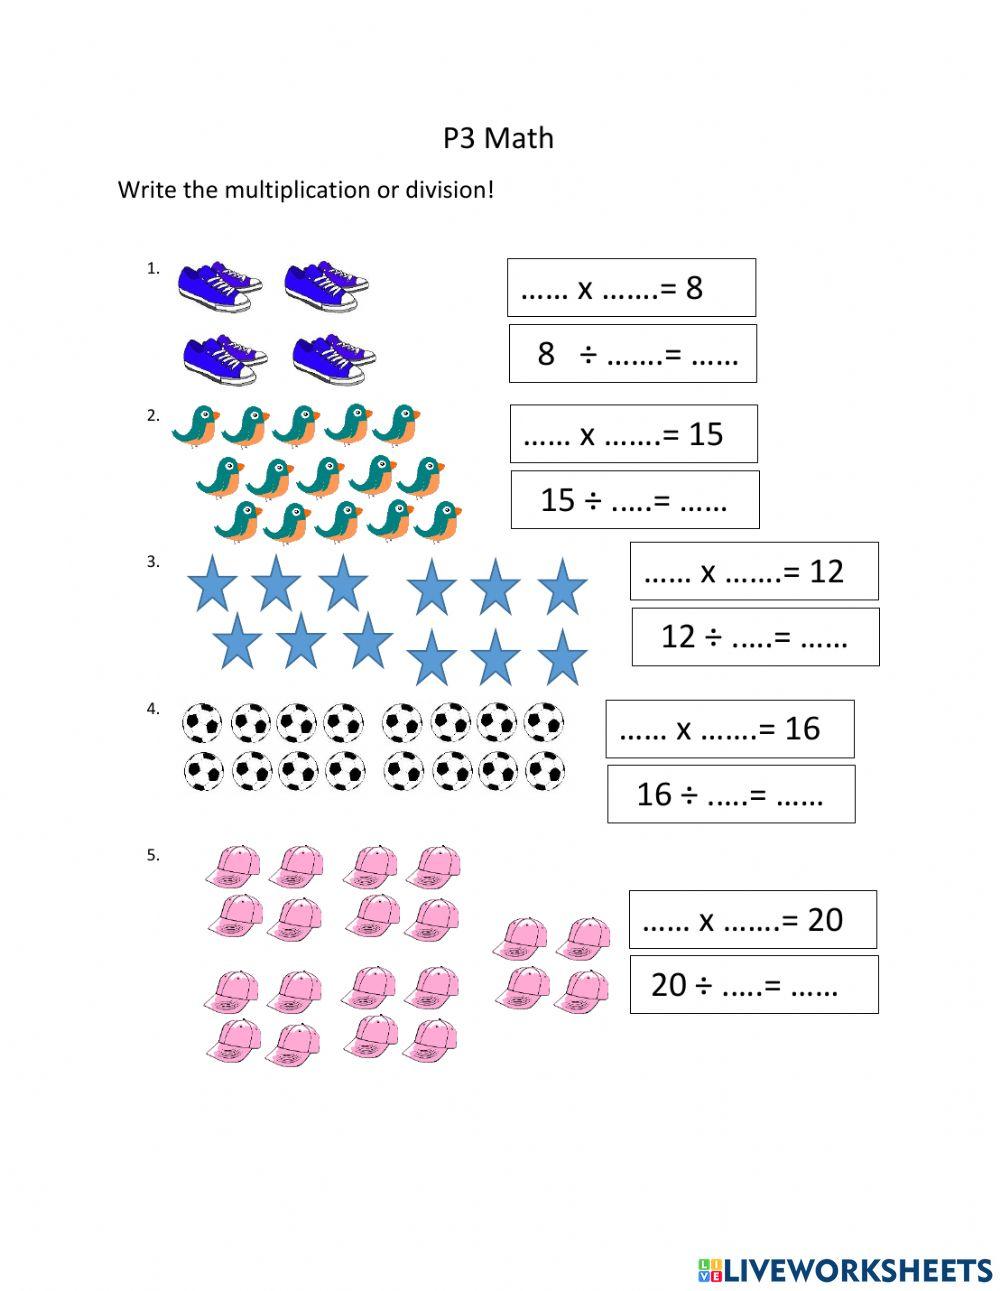 Multiplication or division